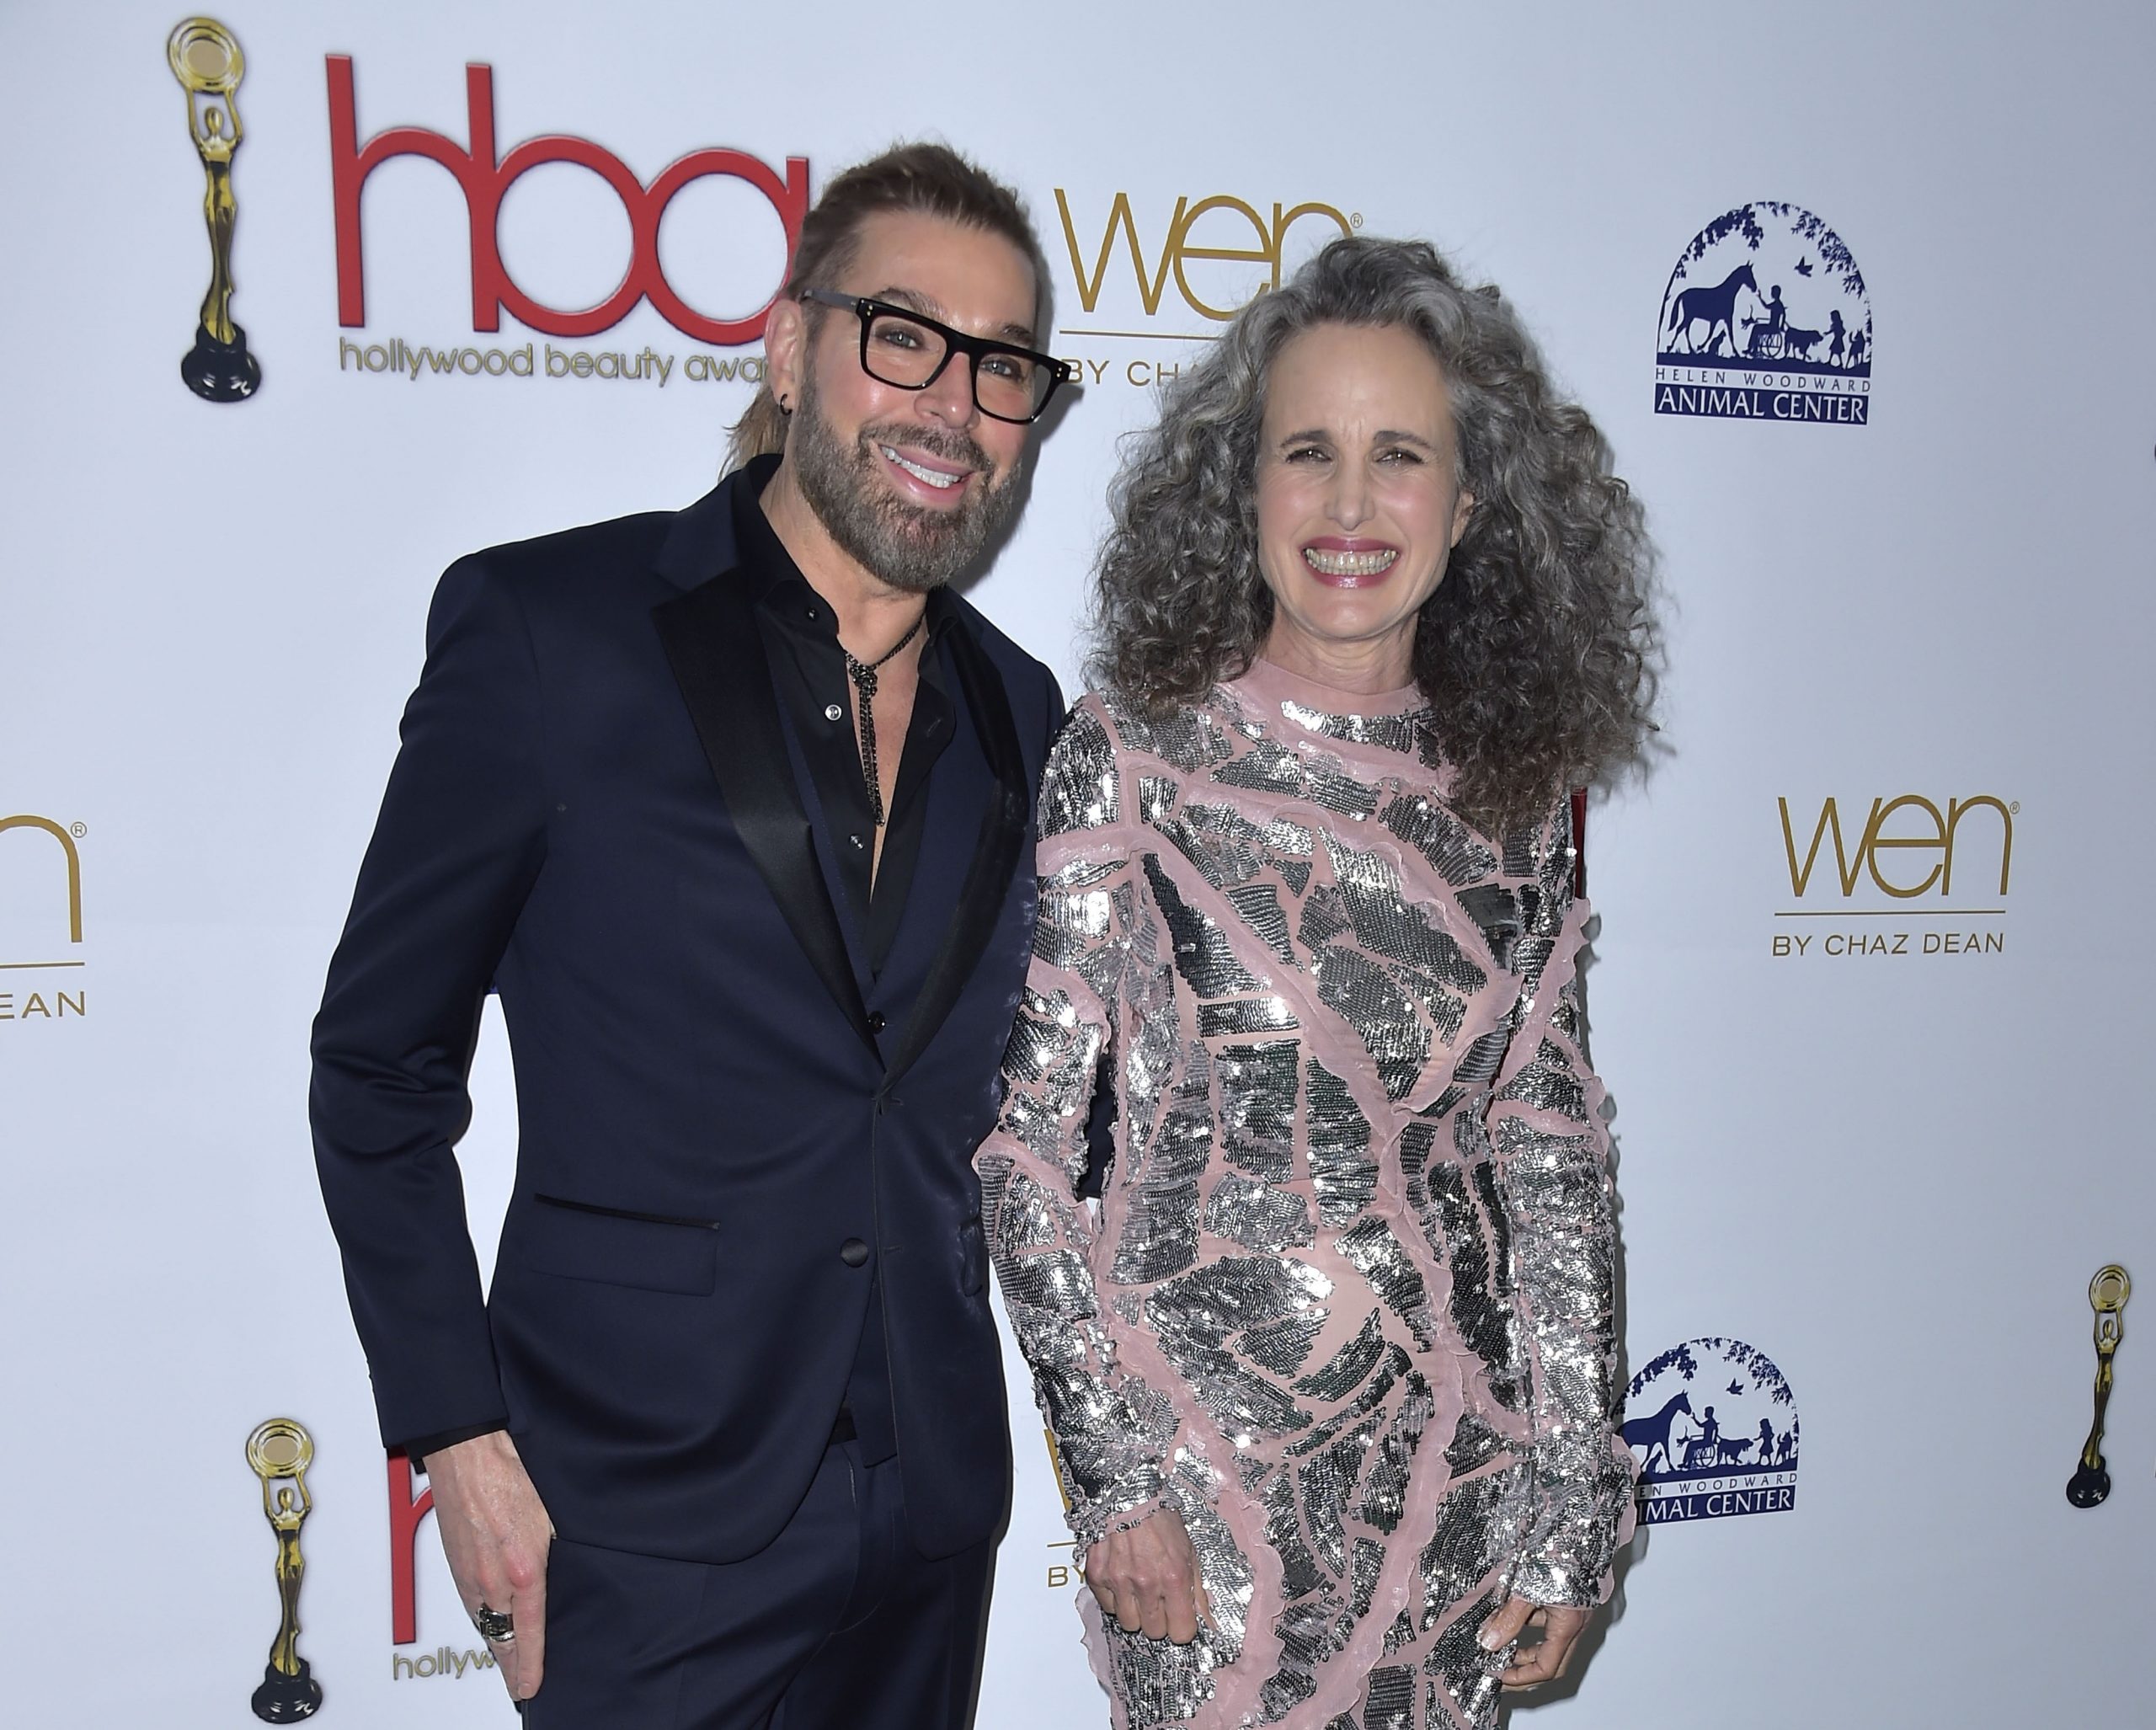 andie macdowell, chaz dean, hollywood beauty awards